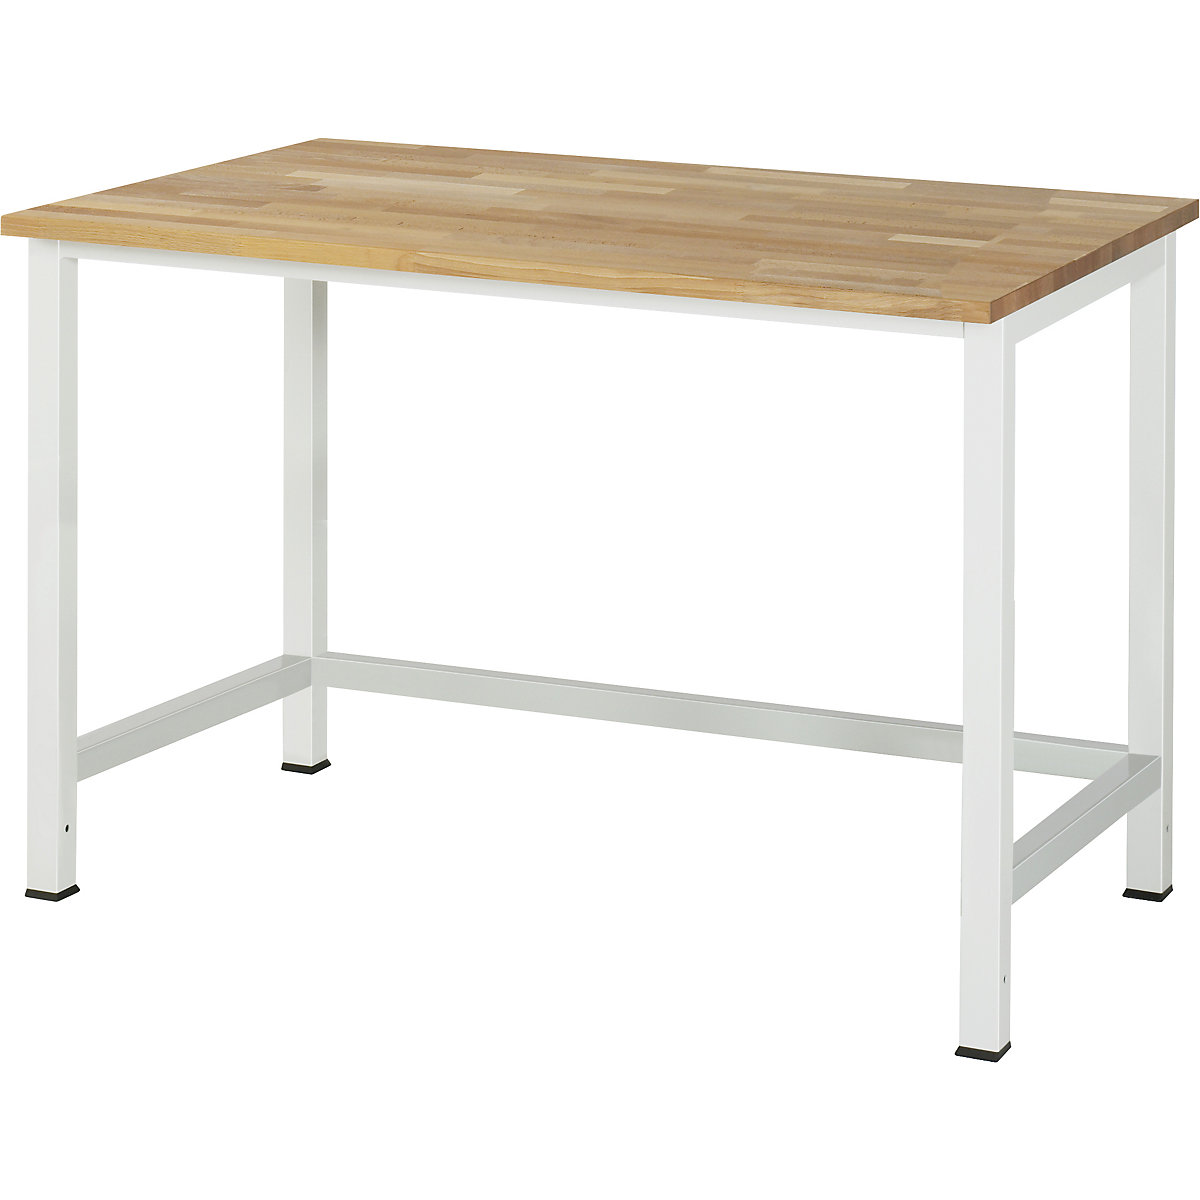 Work table for Series 900 workplace system – RAU, solid beech, width 1250 mm-5